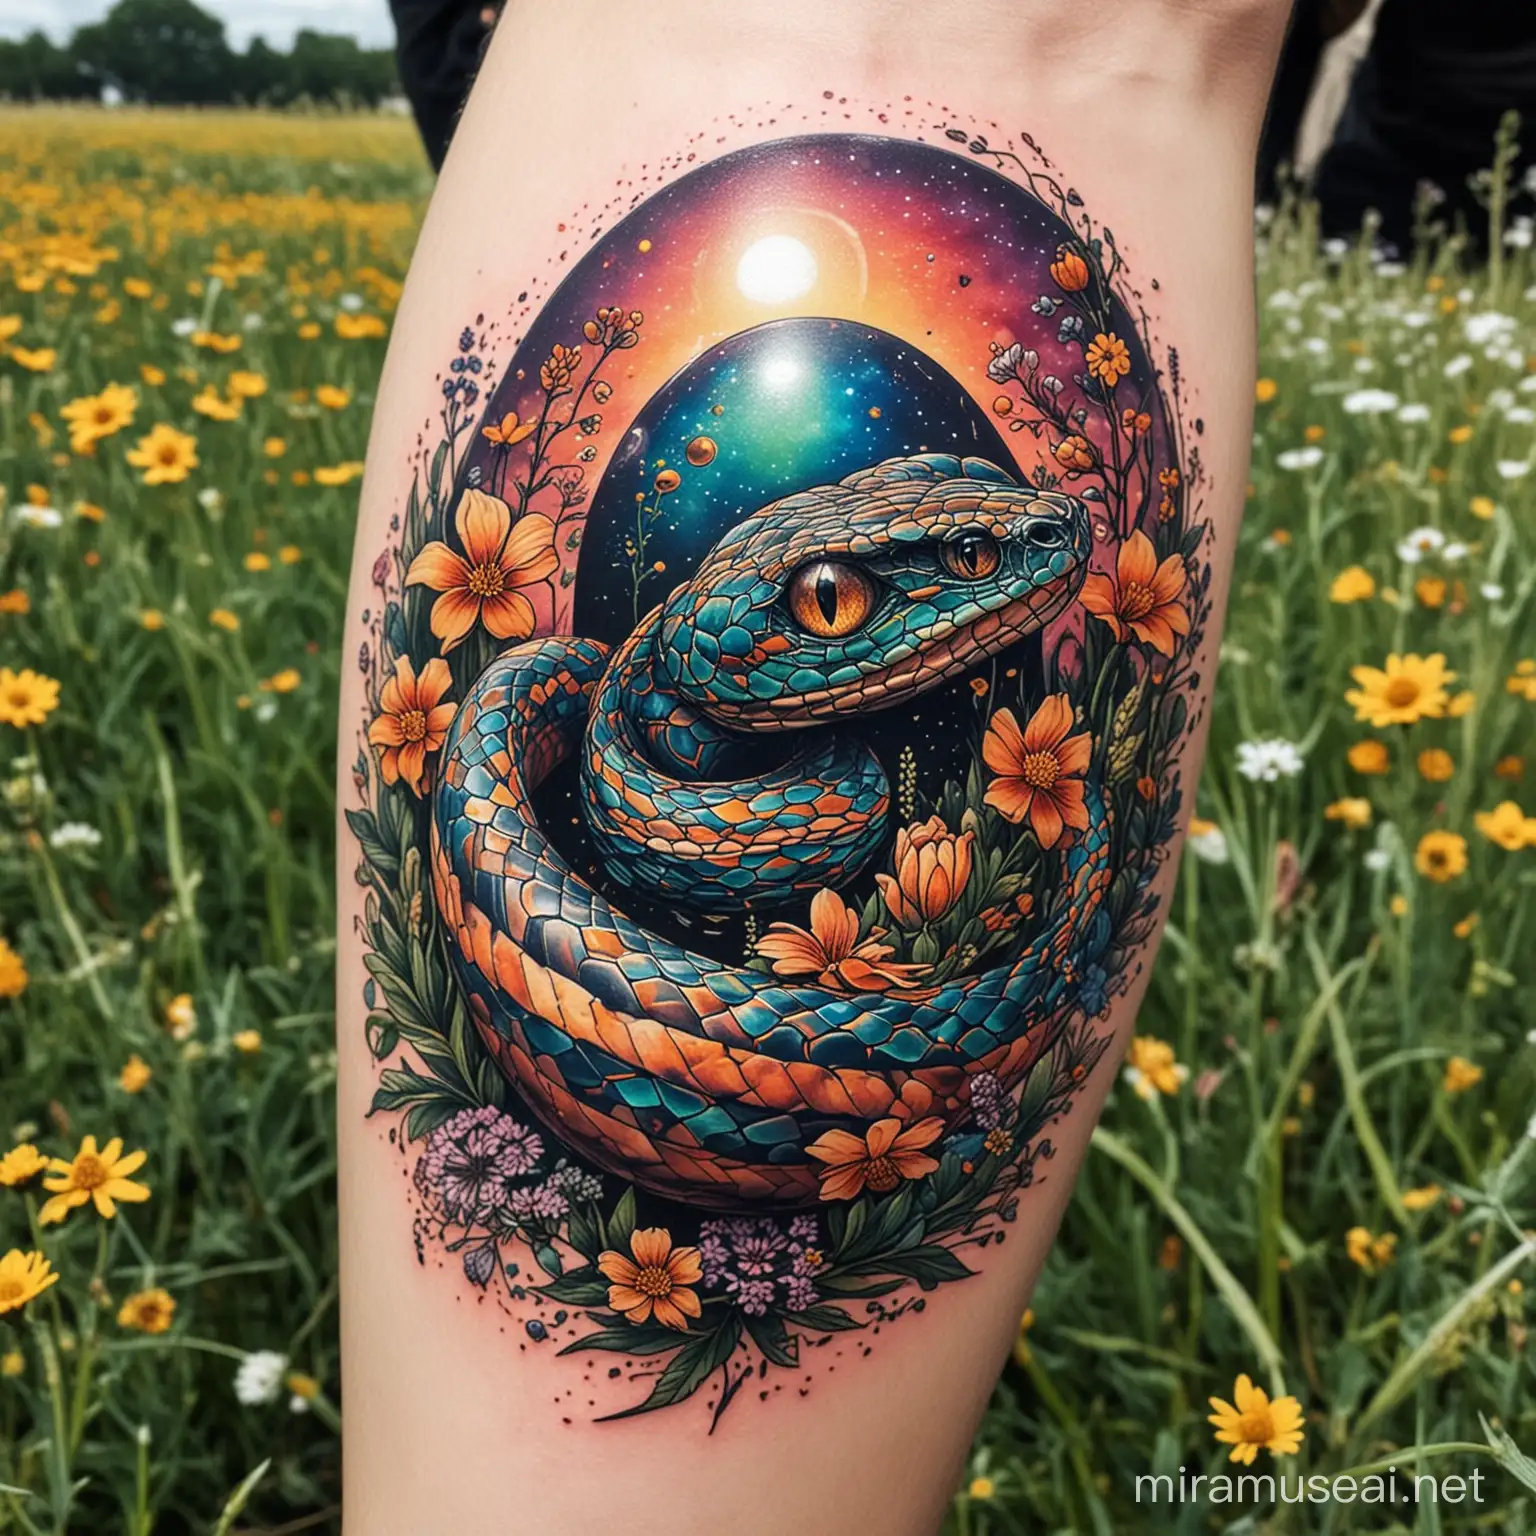 Futuristic Snake and Psychedelic Egg Tattoo Amidst Wildflowers